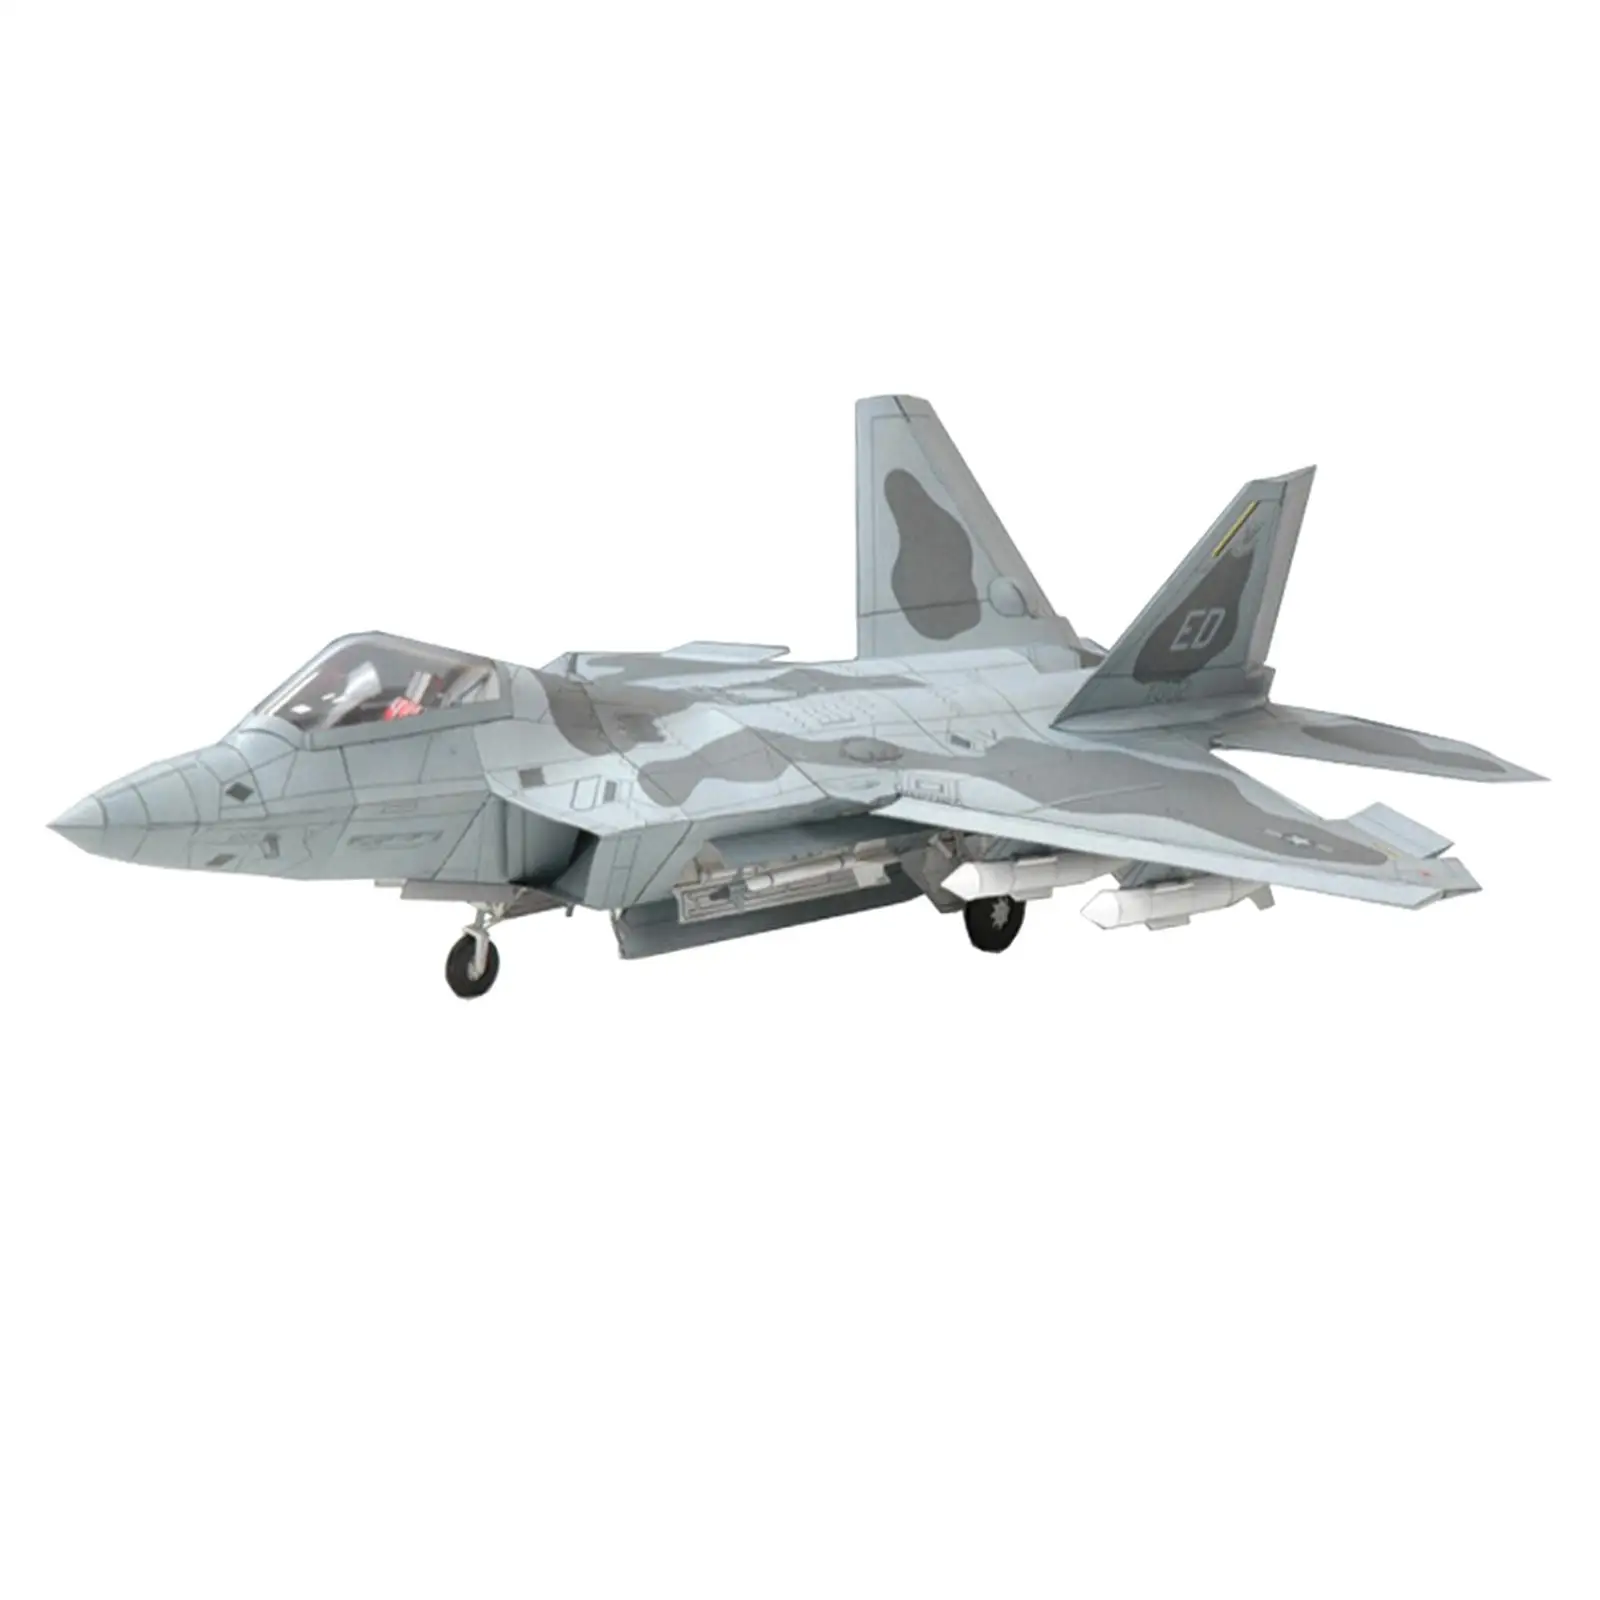 

1/33 3D F22 Fighter Assemble Paper Model Kit Building DIY Assemble Education Toys for Kids Gifts Collectables Tabletop Decor